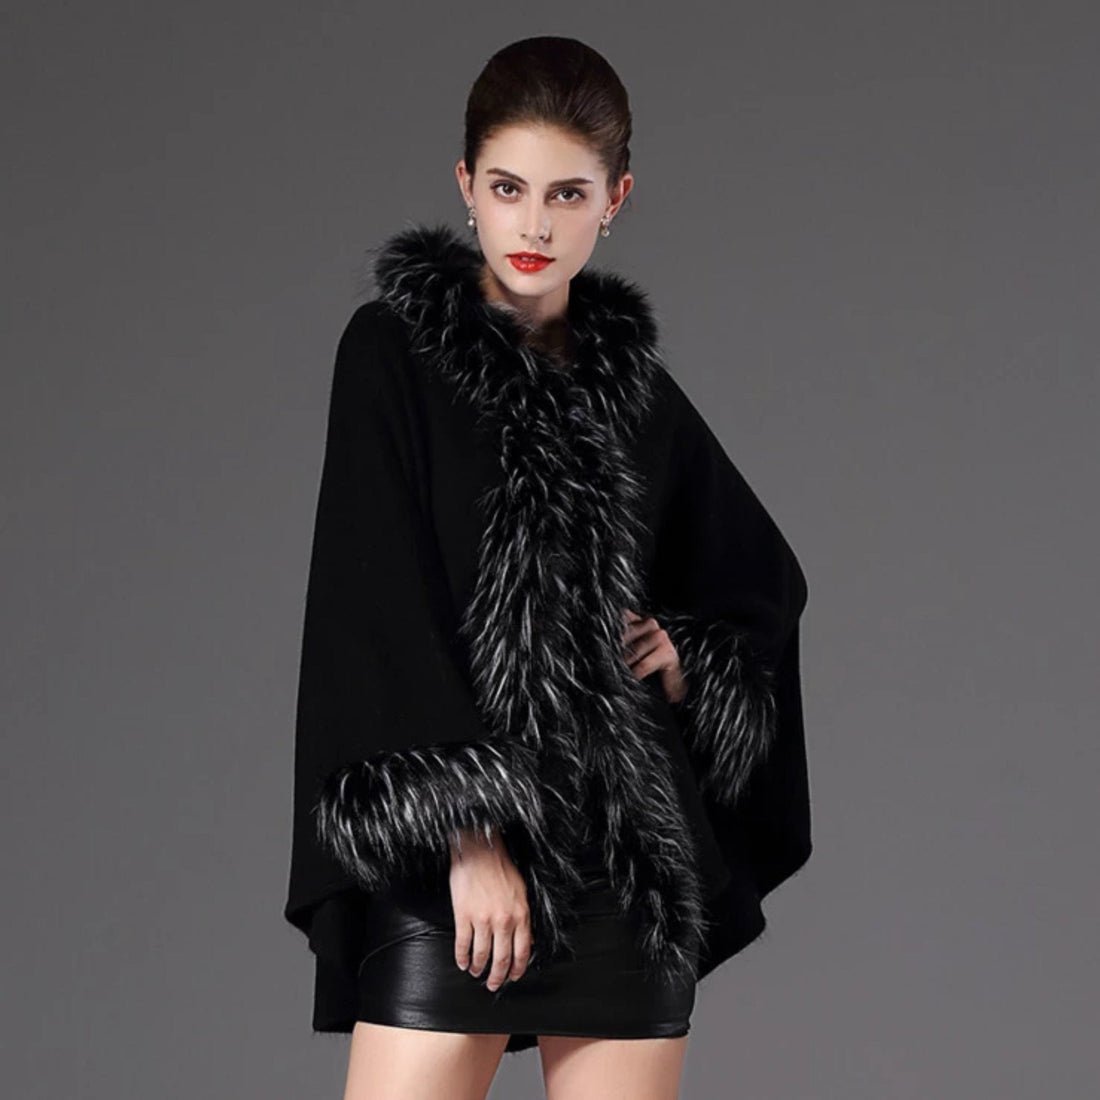 Women's Winter Casual V-Neck Poncho With Faux Fox Fur